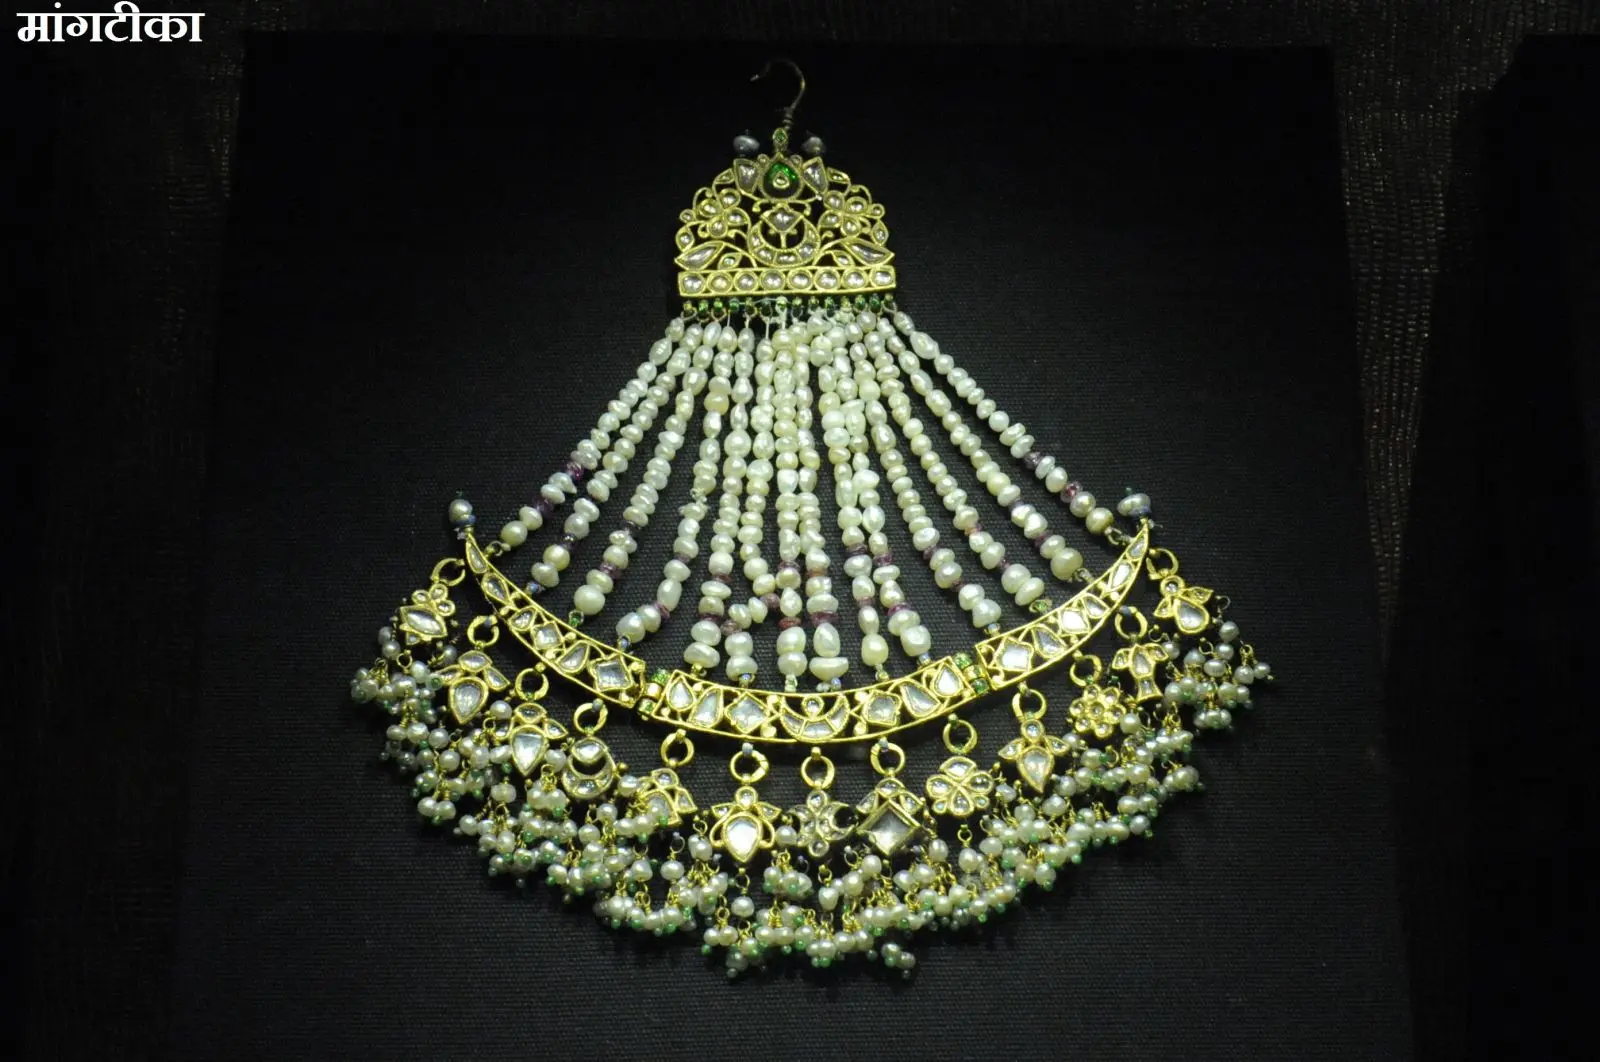 History of Indian Jewellery Change and Progress3  - History of Indian Jewellery Change and Progress3 - Indian Jewellery Through History: Changing to Constant